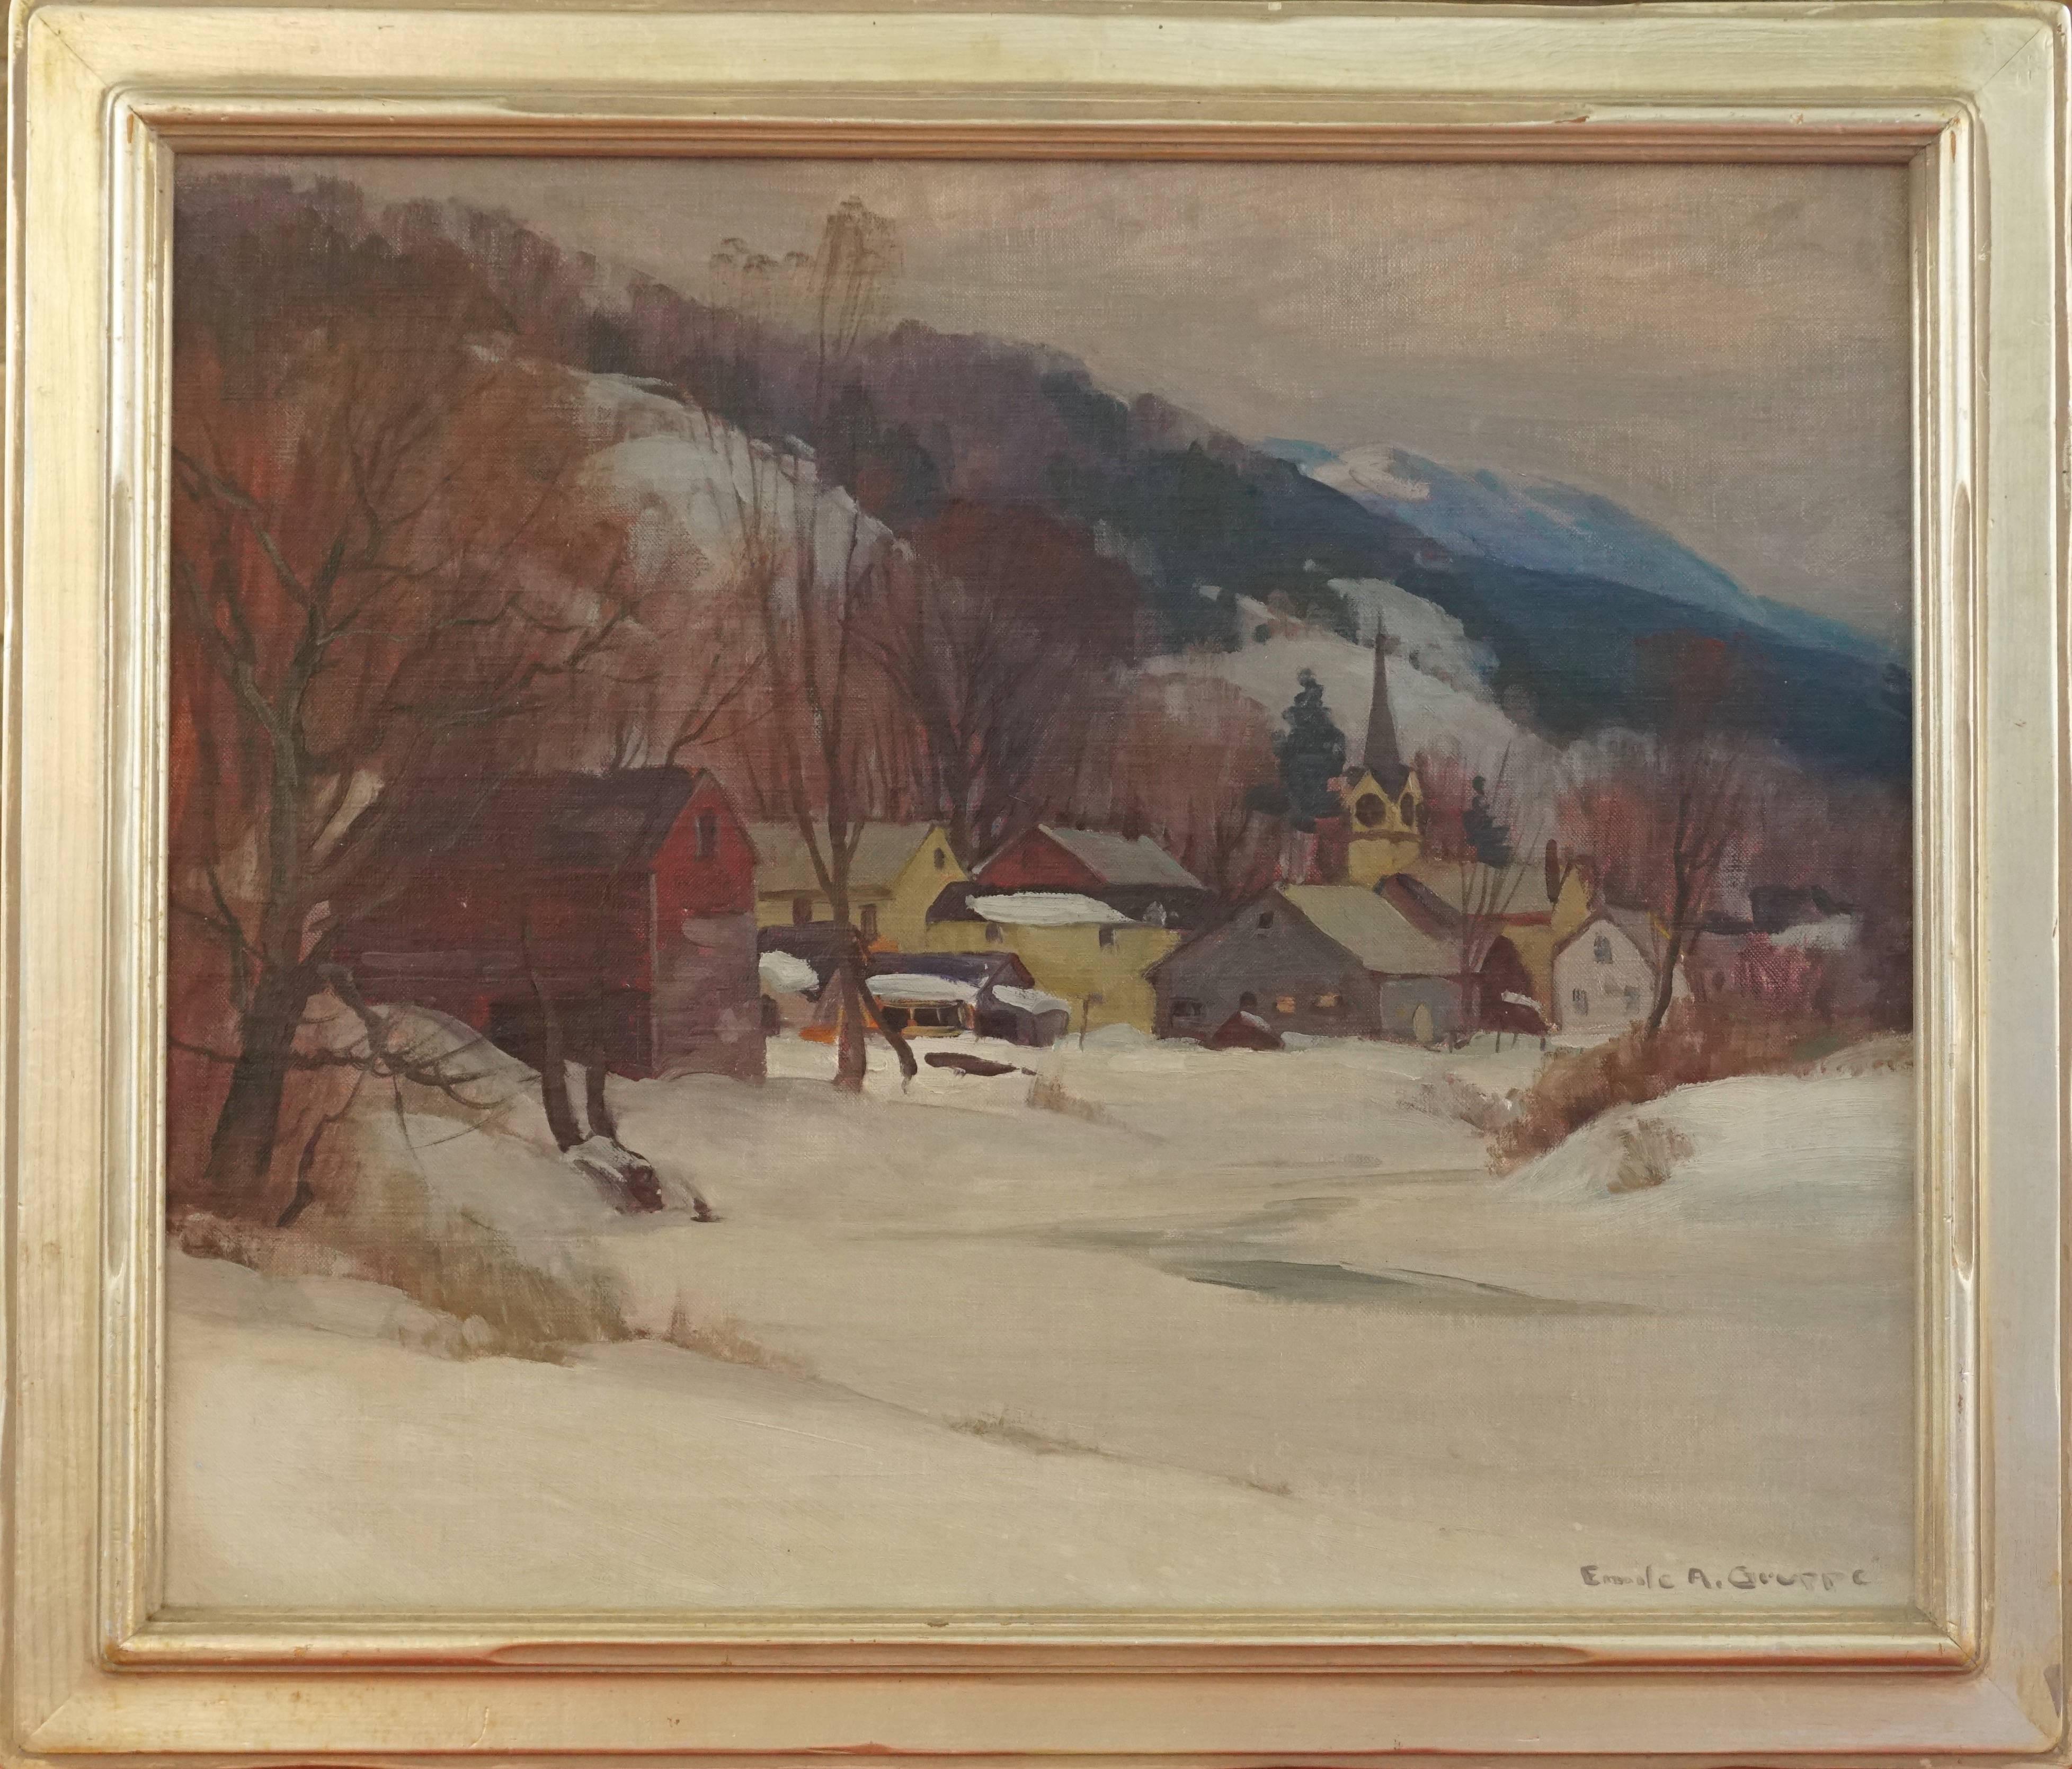 Emile Albert gruppe (Am. 1896-1978) "Winter Cambridge" Vermont oil on canvas snow painting. With original frame and paper label on verso of a exhibit at Bethal Inn Gloucester 1946 with Title, Artist Name, Artist's address and price. A